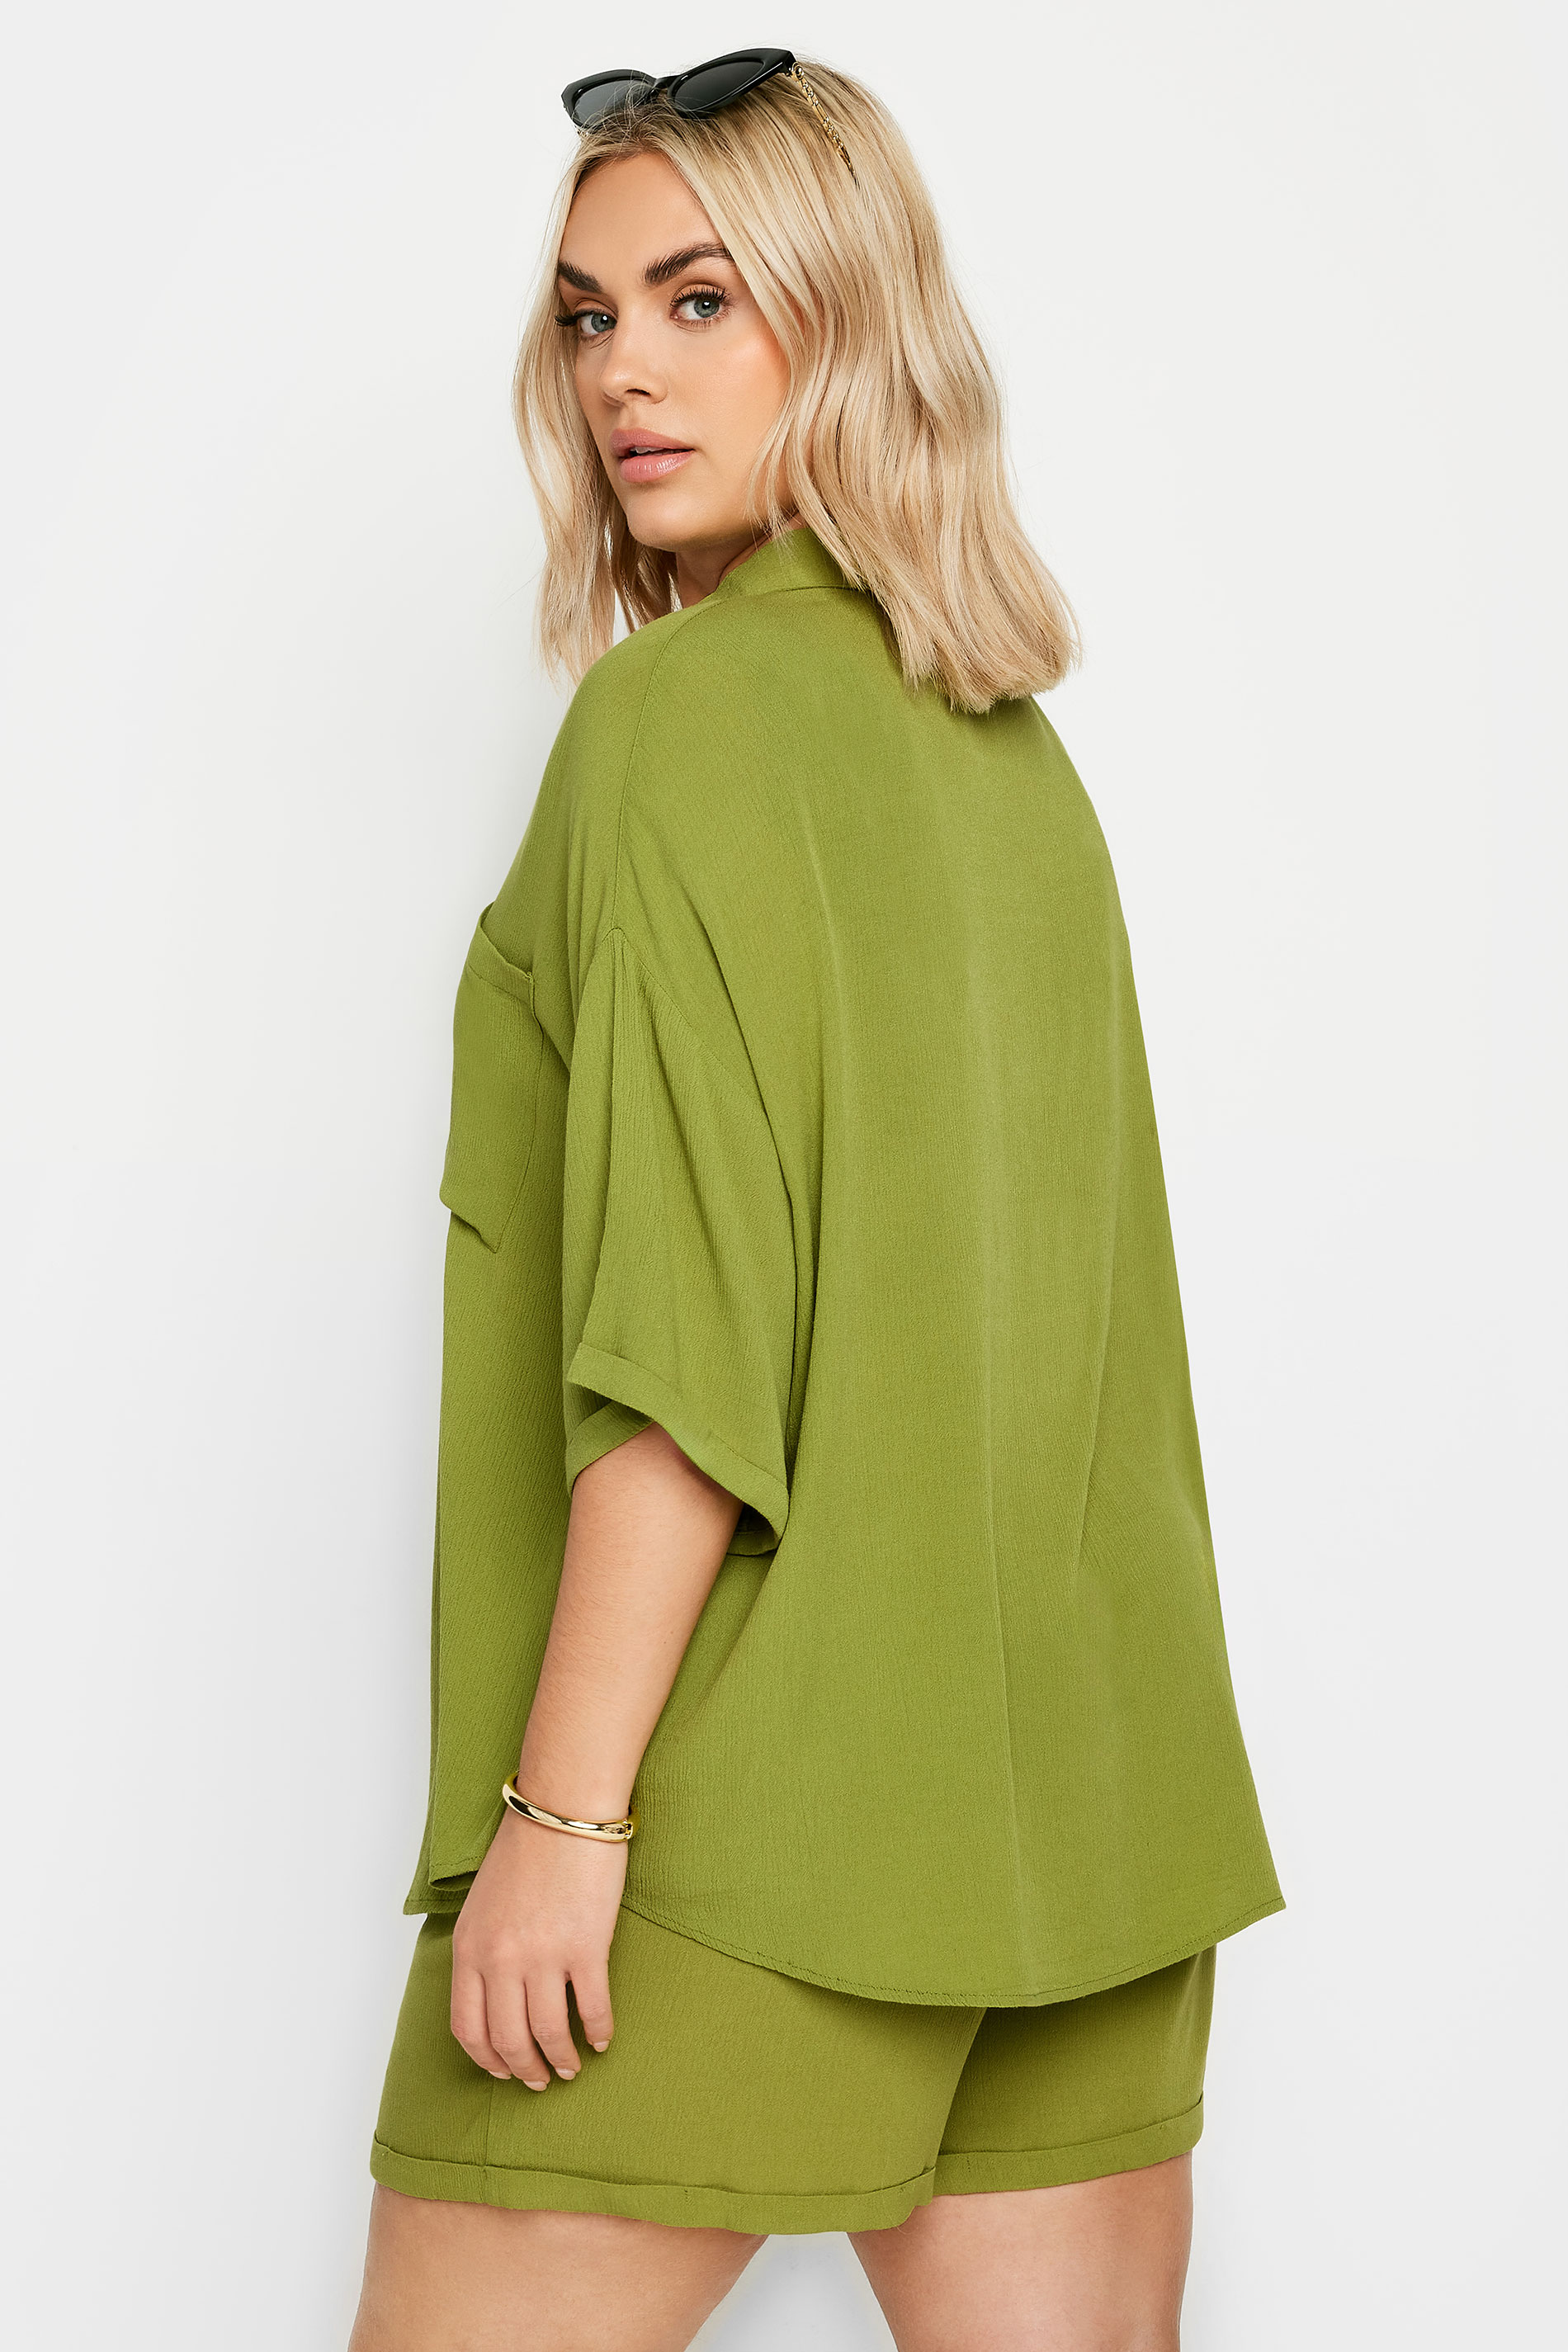 LIMITED COLLECTION Plus Size Olive Green Crinkle Shirt | Yours Clothing 3